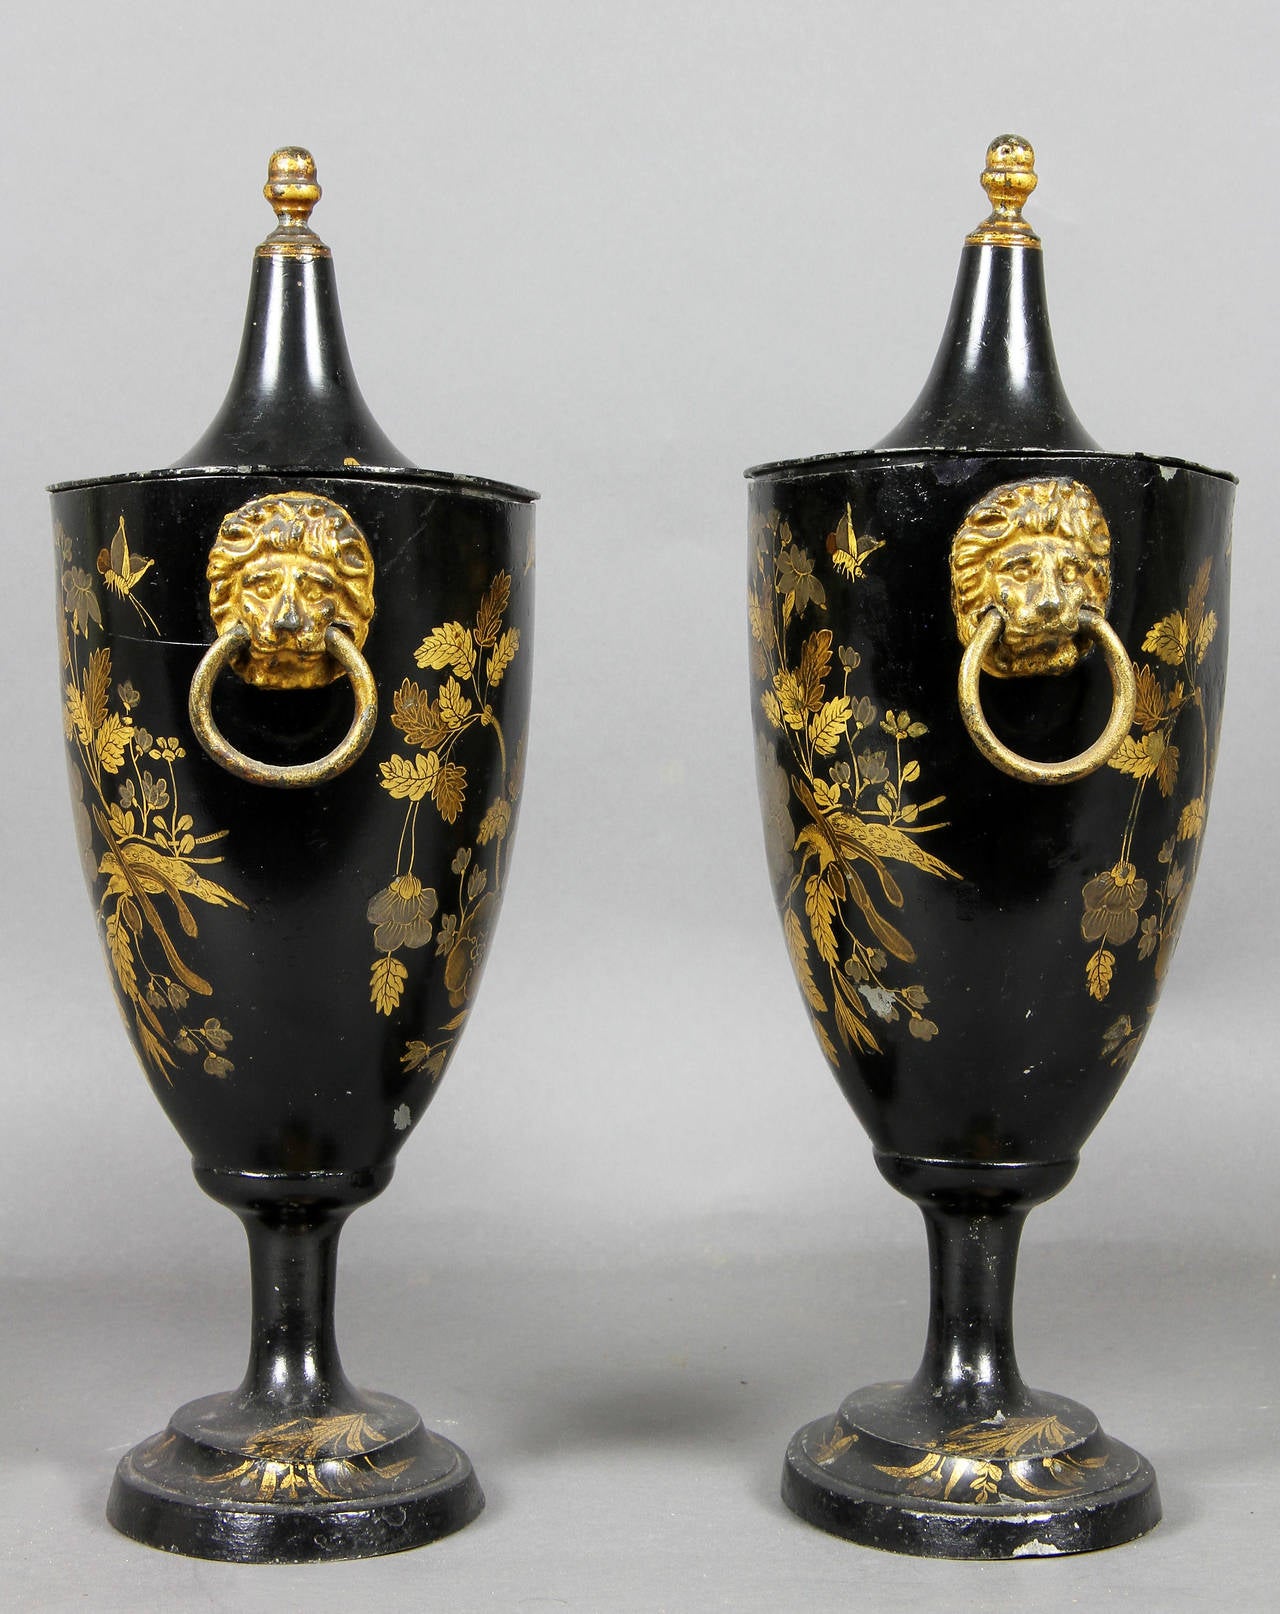 Early 19th Century Pair of Regency Tole Black Japanned and Gilded Chestnut Urns